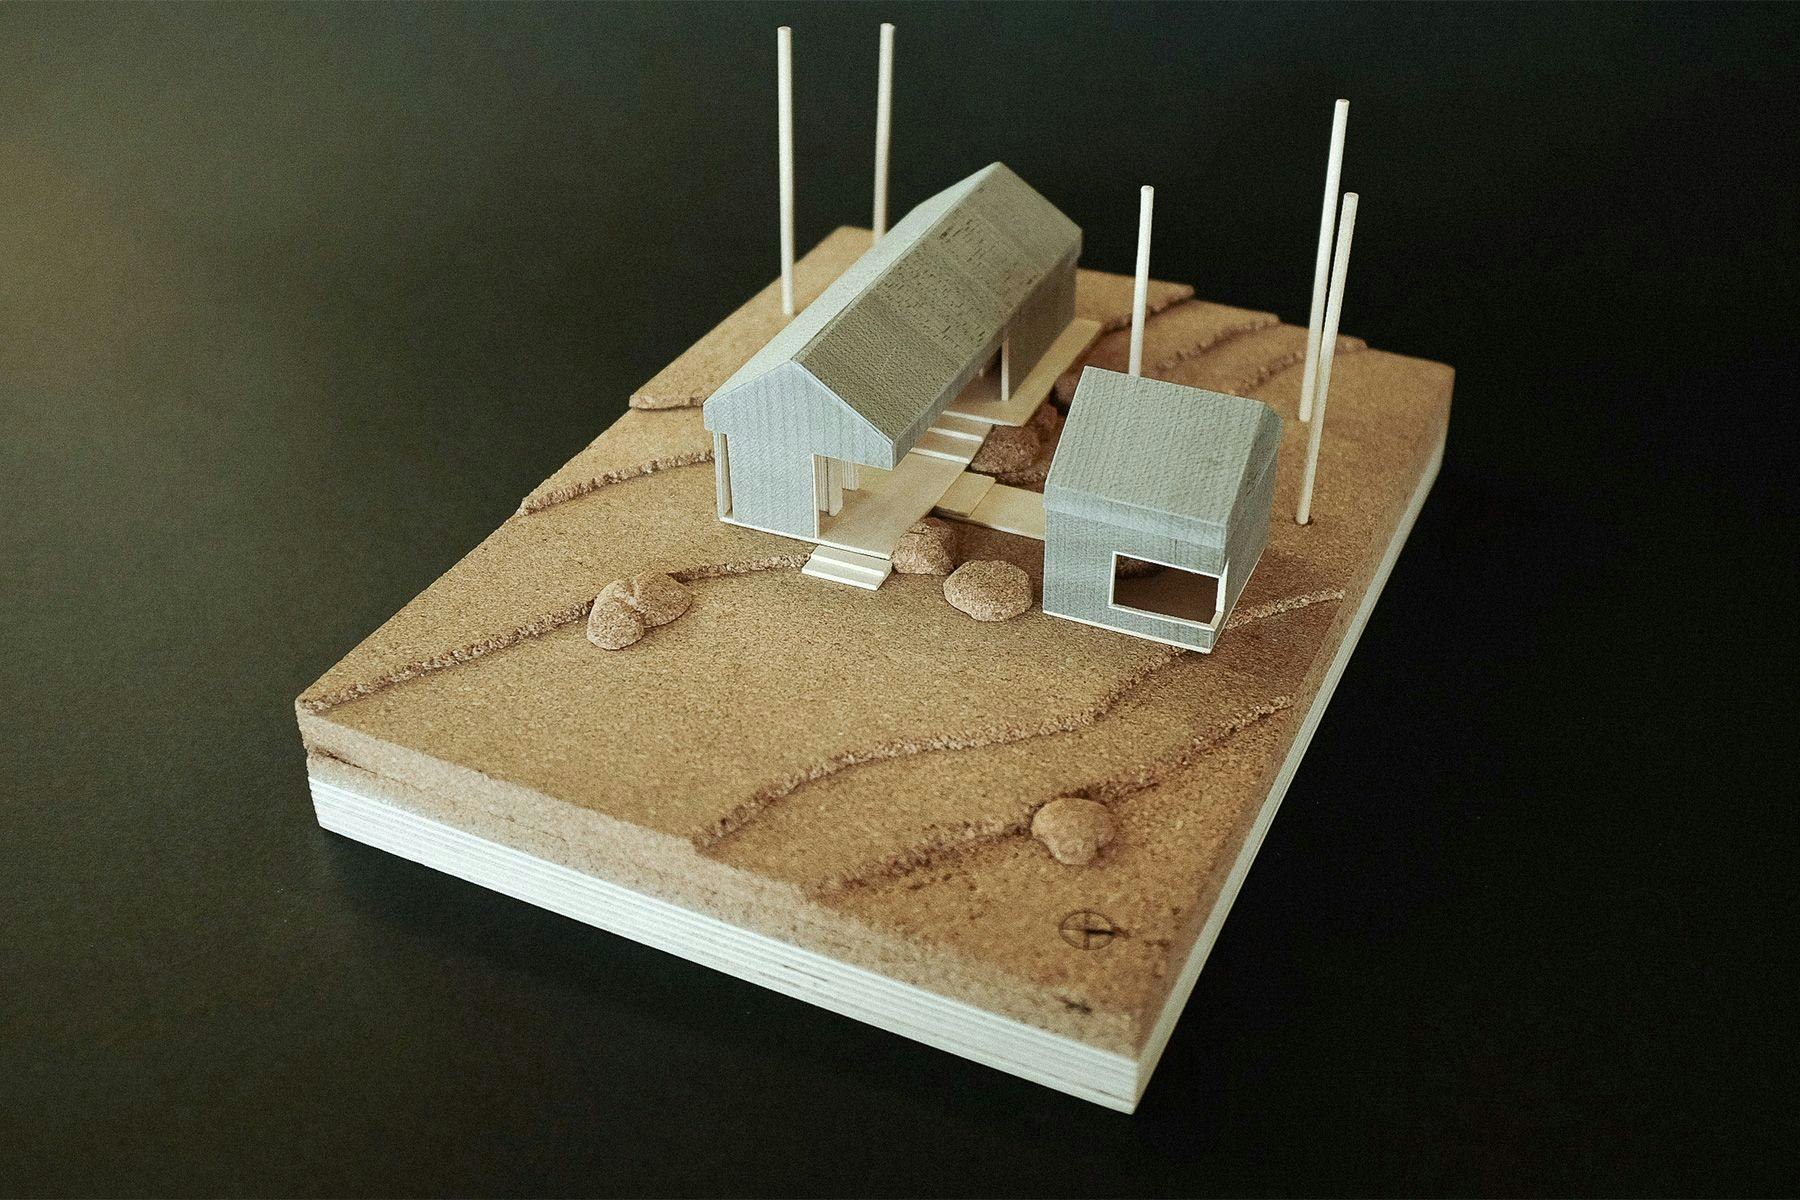 scale model of john fache's surf ranch hydrotherapy building